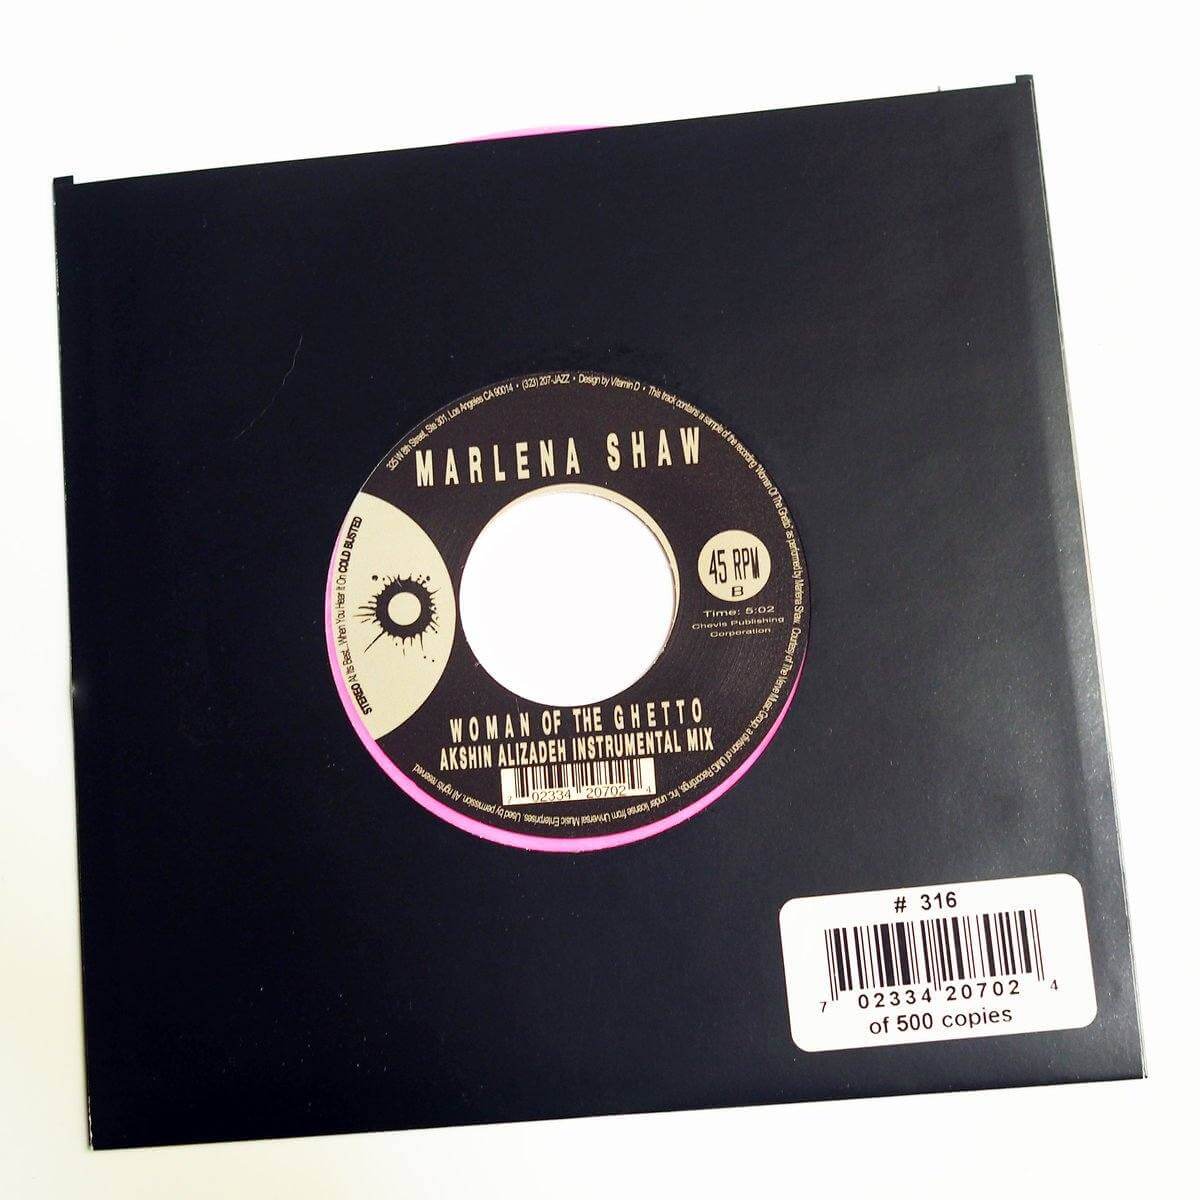 Marlena Shaw - Woman of the Ghetto (Akshin Alizadeh Mixes) - Limited Edition Pink 7 Inch Vinyl (7th Pressing) - Cold Busted